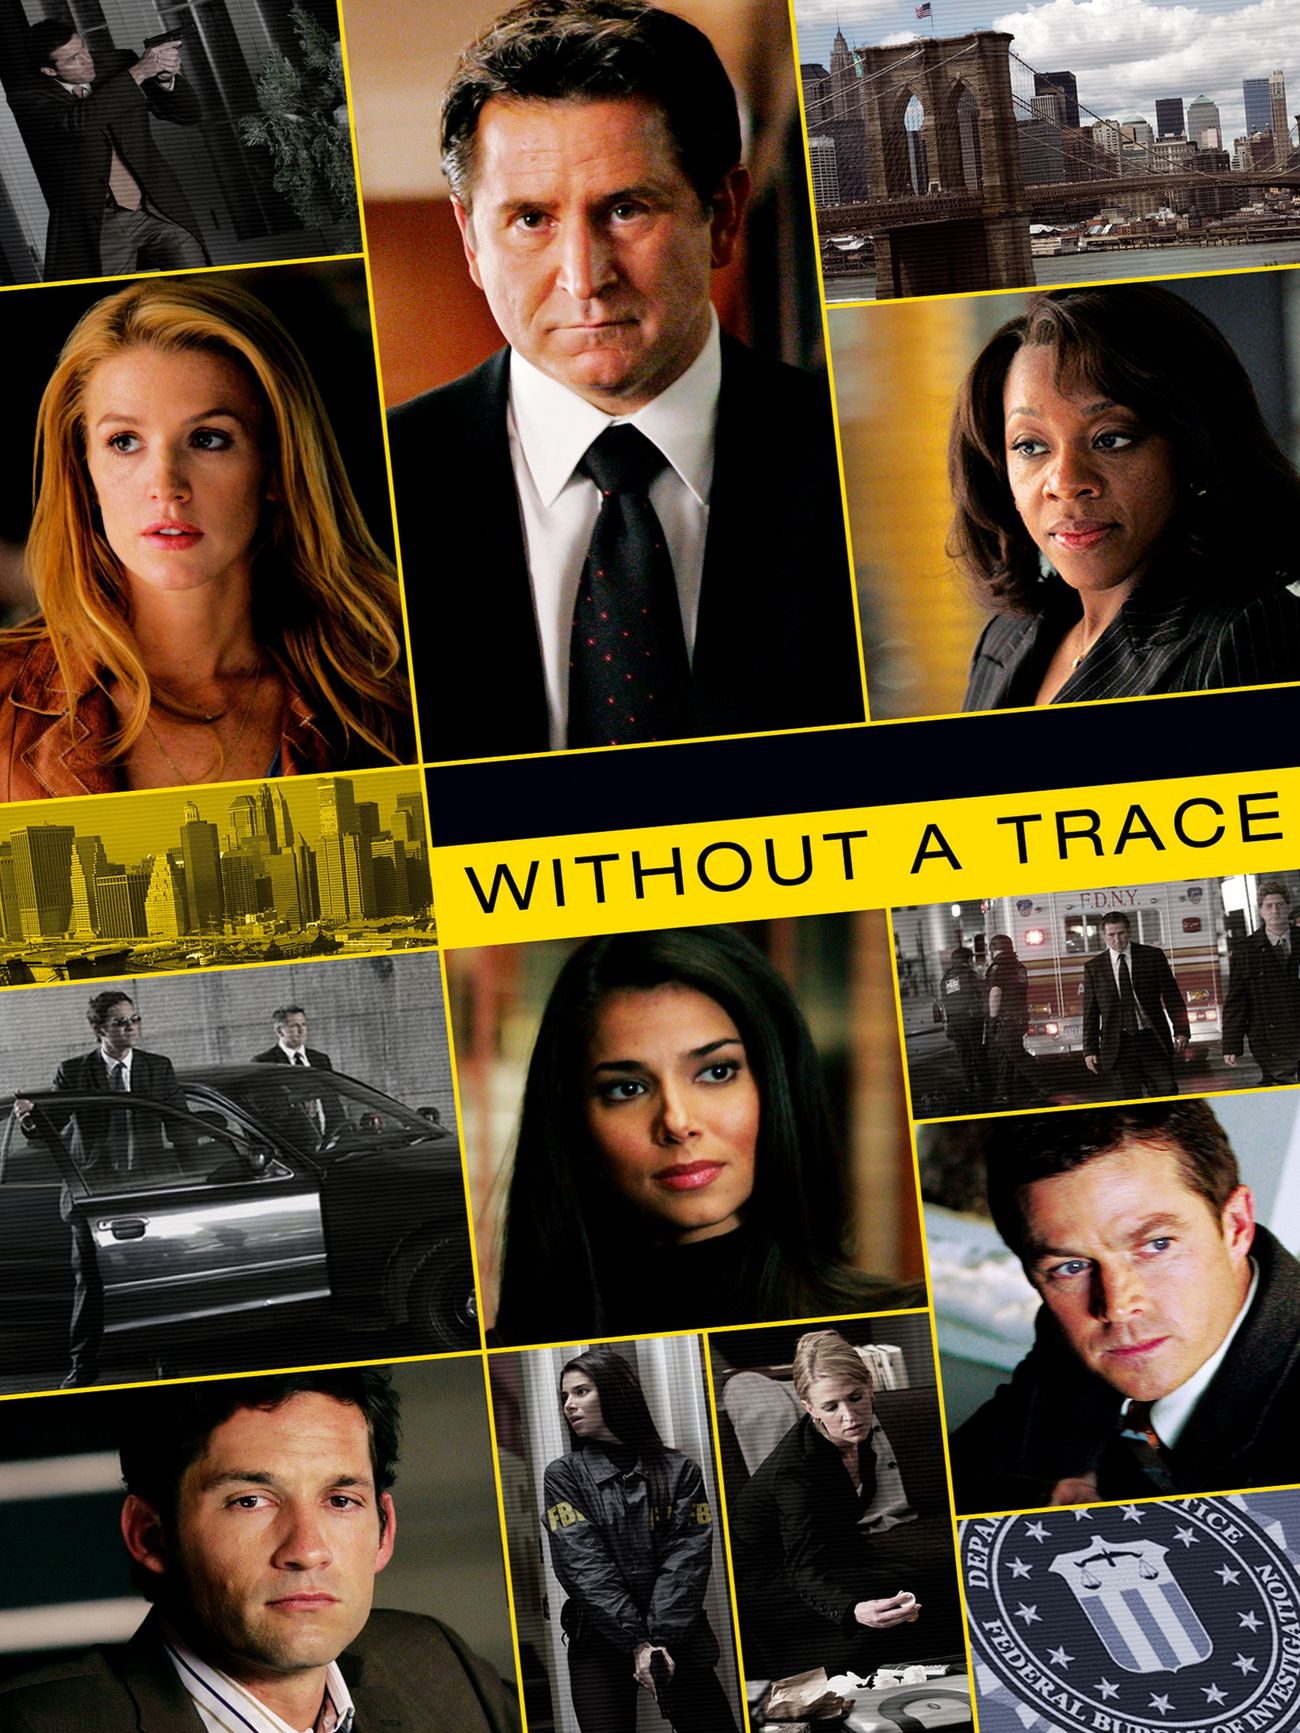 Without a trace episodes online